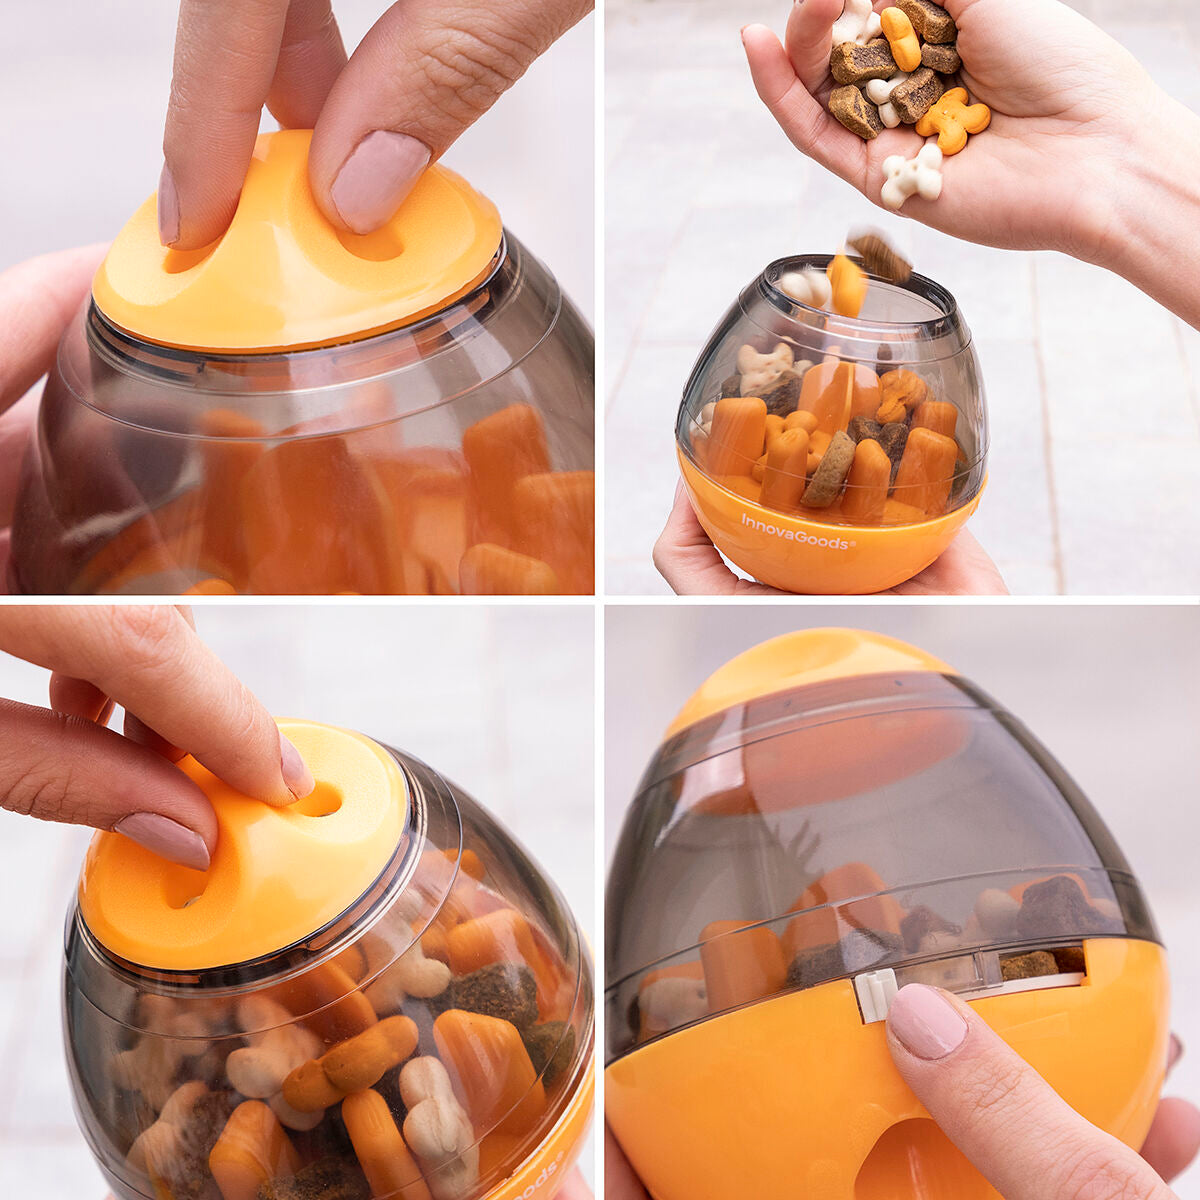 2-In-1 Treat Dispenser Toy for Pets Petyt InnovaGoods